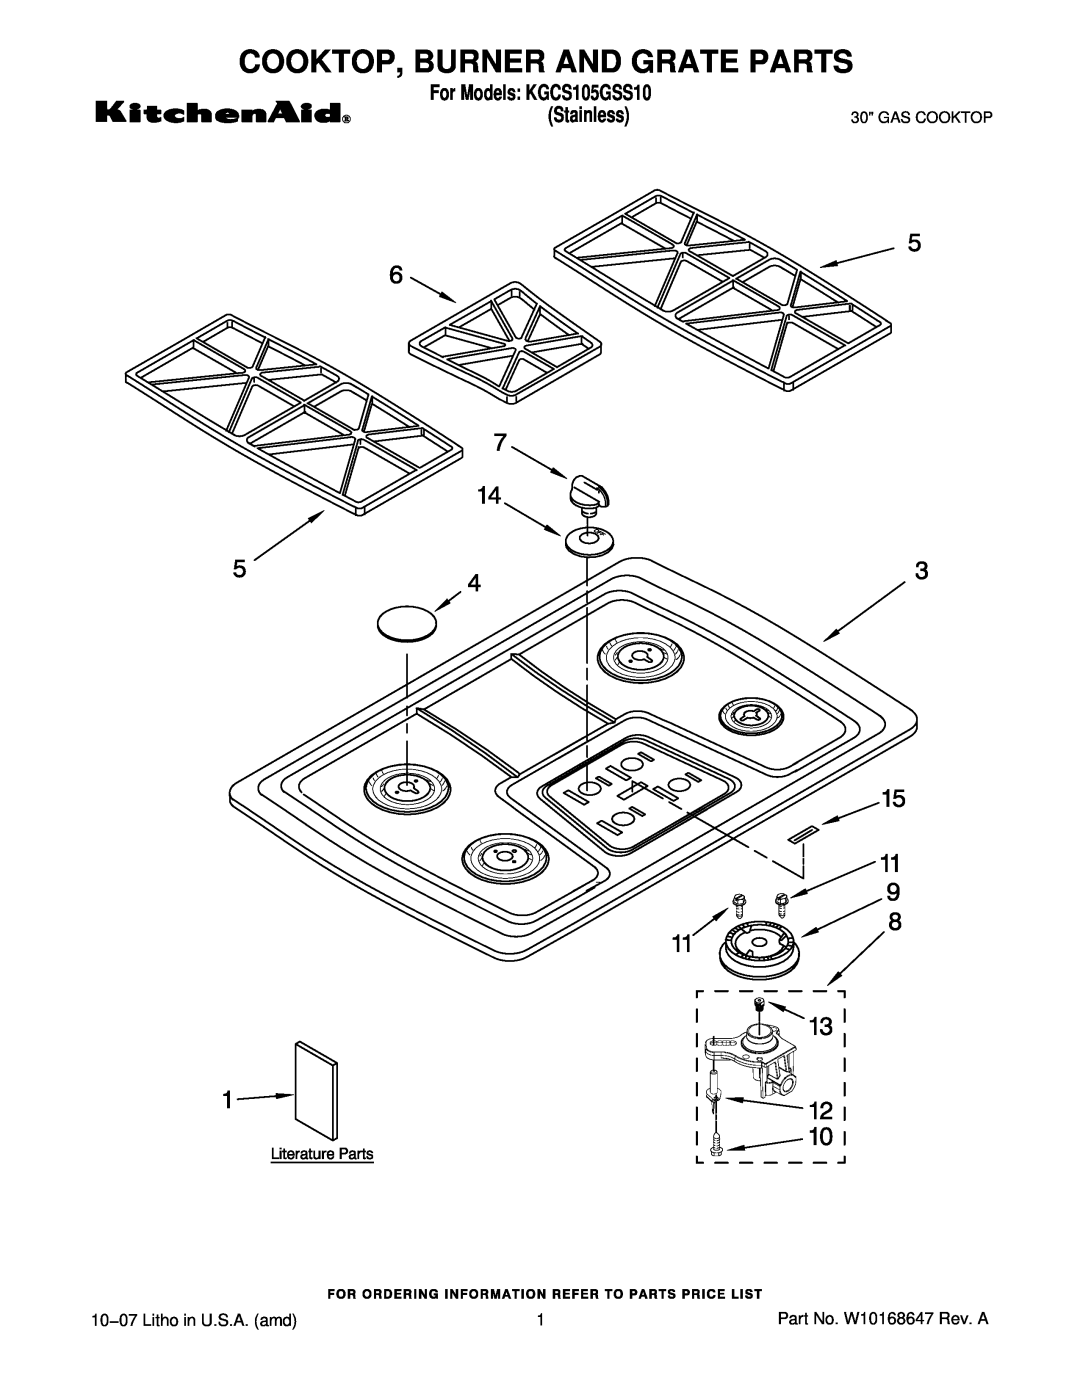 KitchenAid KGCS105GSS10 manual Cooktop, Burner And Grate Parts, 10−07 Litho in U.S.A. amd, Gas Cooktop 